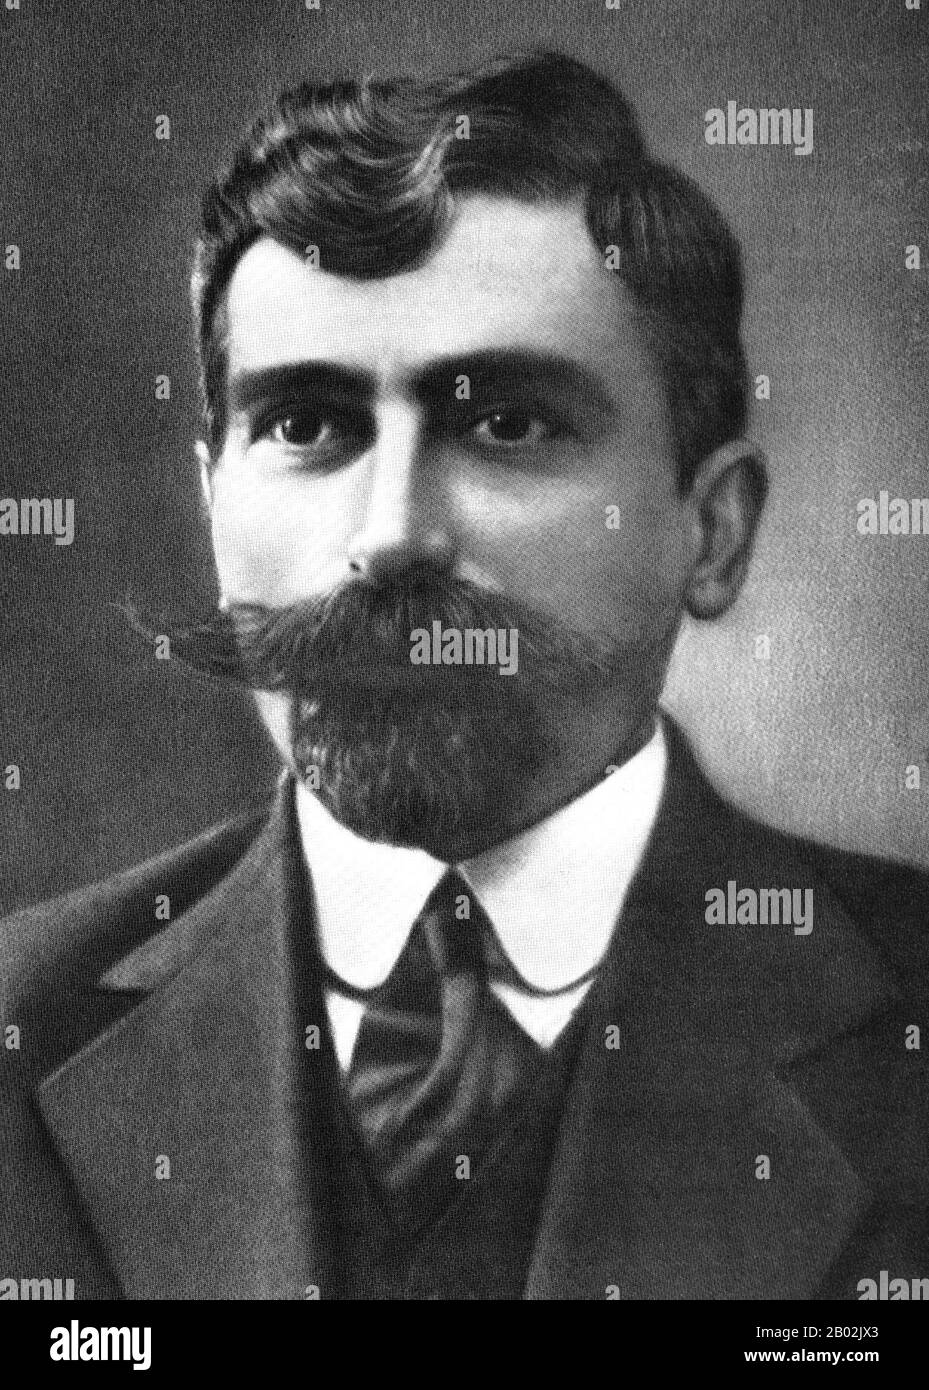 Aram Manukian (Armenian: Արամ Մանուկեան) (1879 – Yerevan, 29 January 1919), whose sobriquets included Aram Pasha, Aram of Van and Sarkis Hovanessian, was an Armenian revolutionary, politician and military commander who was one of the leaders of the Van Resistance and instrumented the foundation of the First Republic of Armenia.  Manukian joined the Armenian Revolutionary Federation at a very early age. He is credited as a political, military and spiritual leader of the Armenian people during and after the Armenian Genocide. Stock Photo